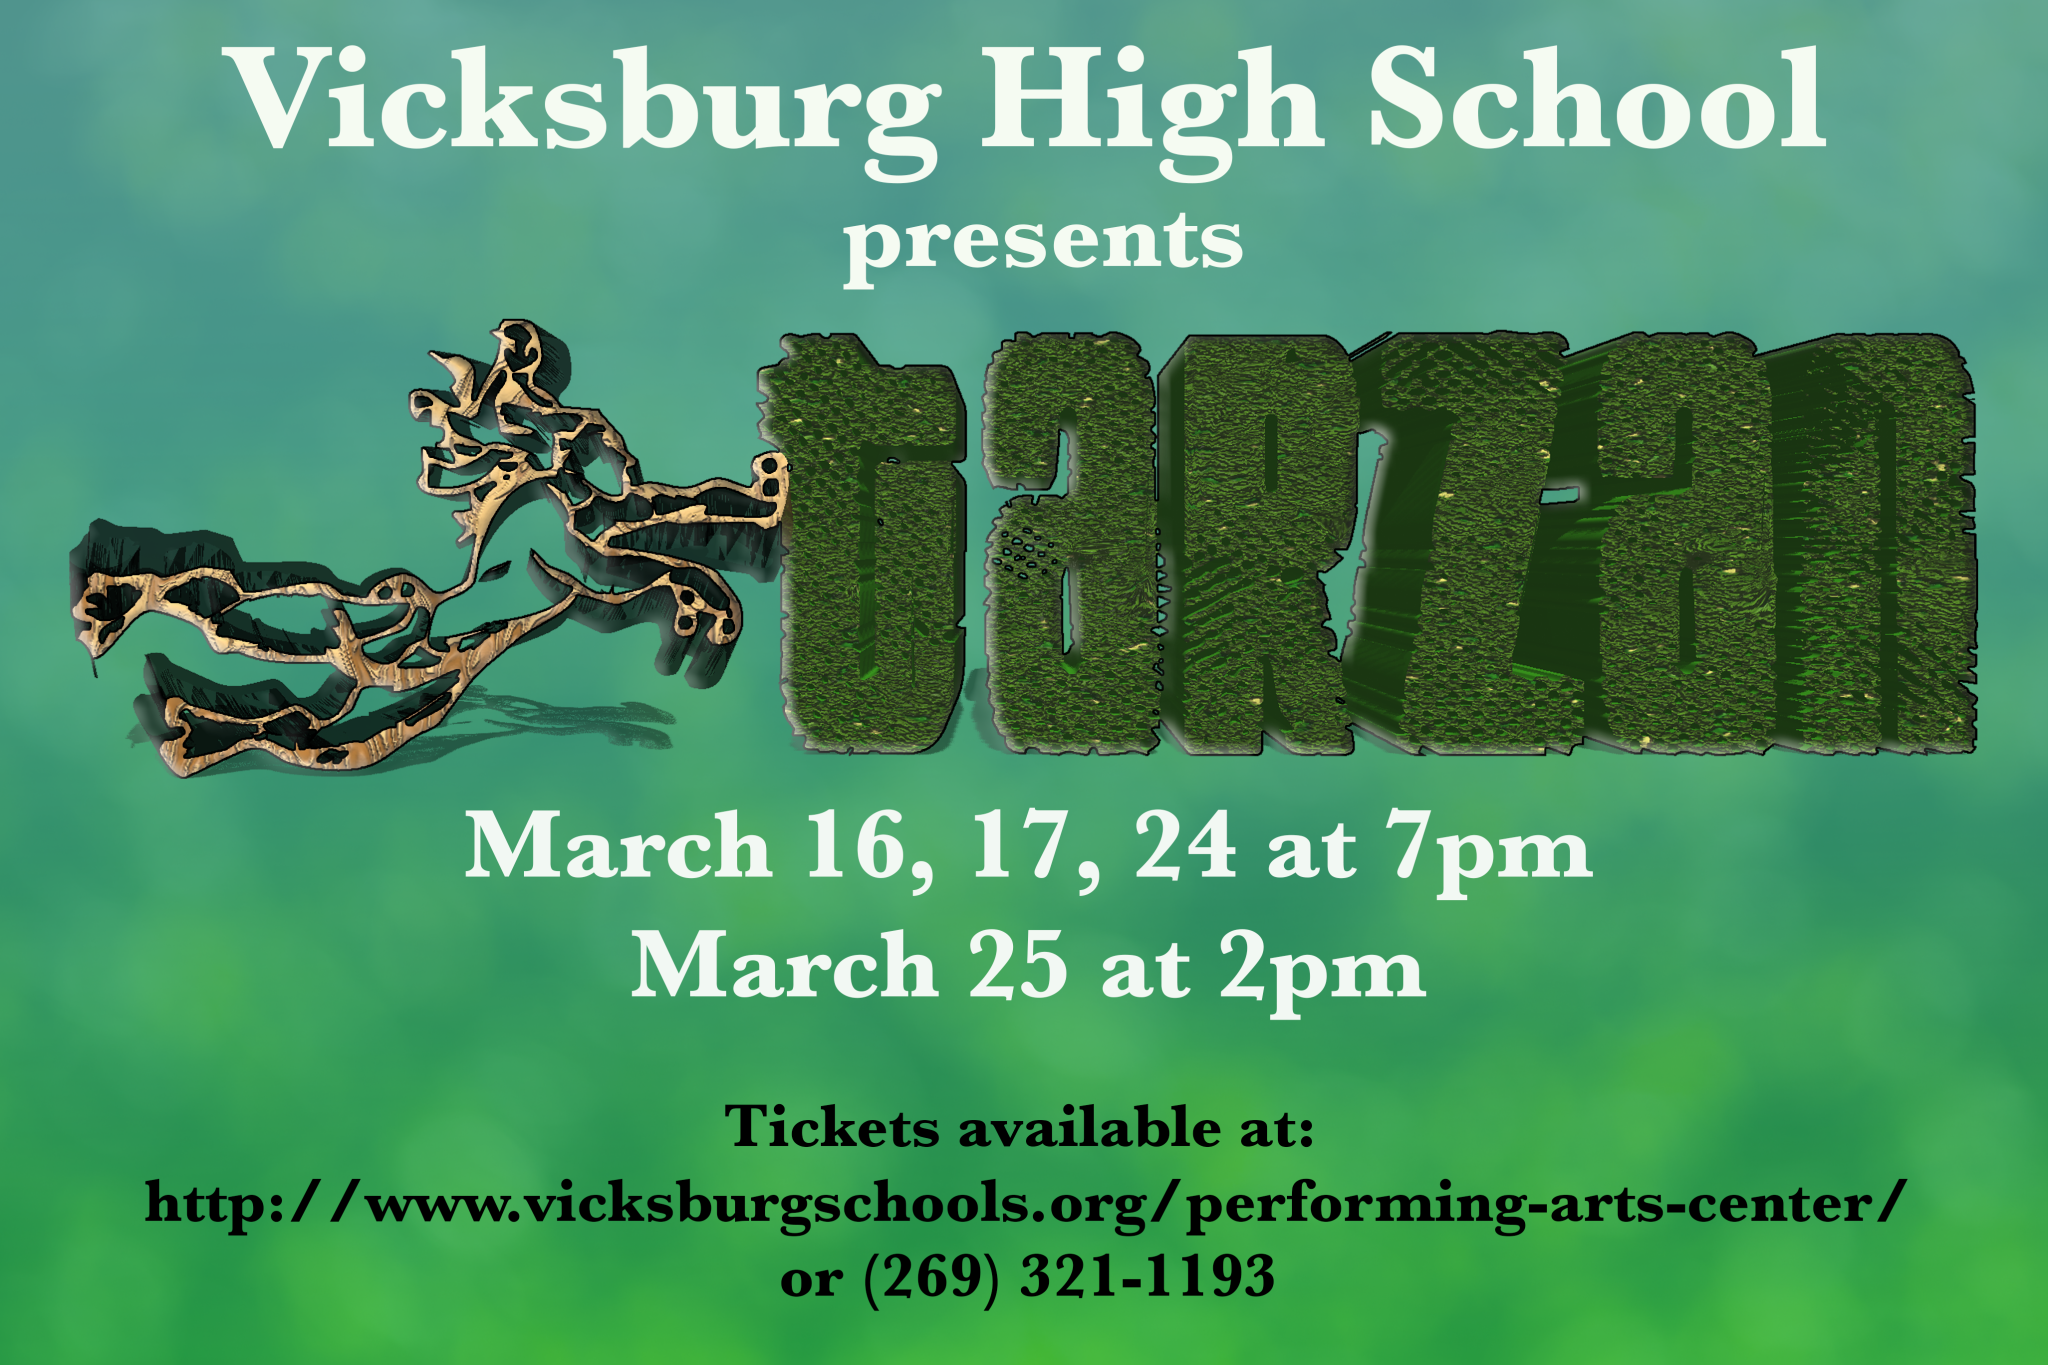 VHS presents Tarzan March 16, 17, 24 2019 at 7pm and March 25 at 2pm For Tickets CAll 269-321-1193